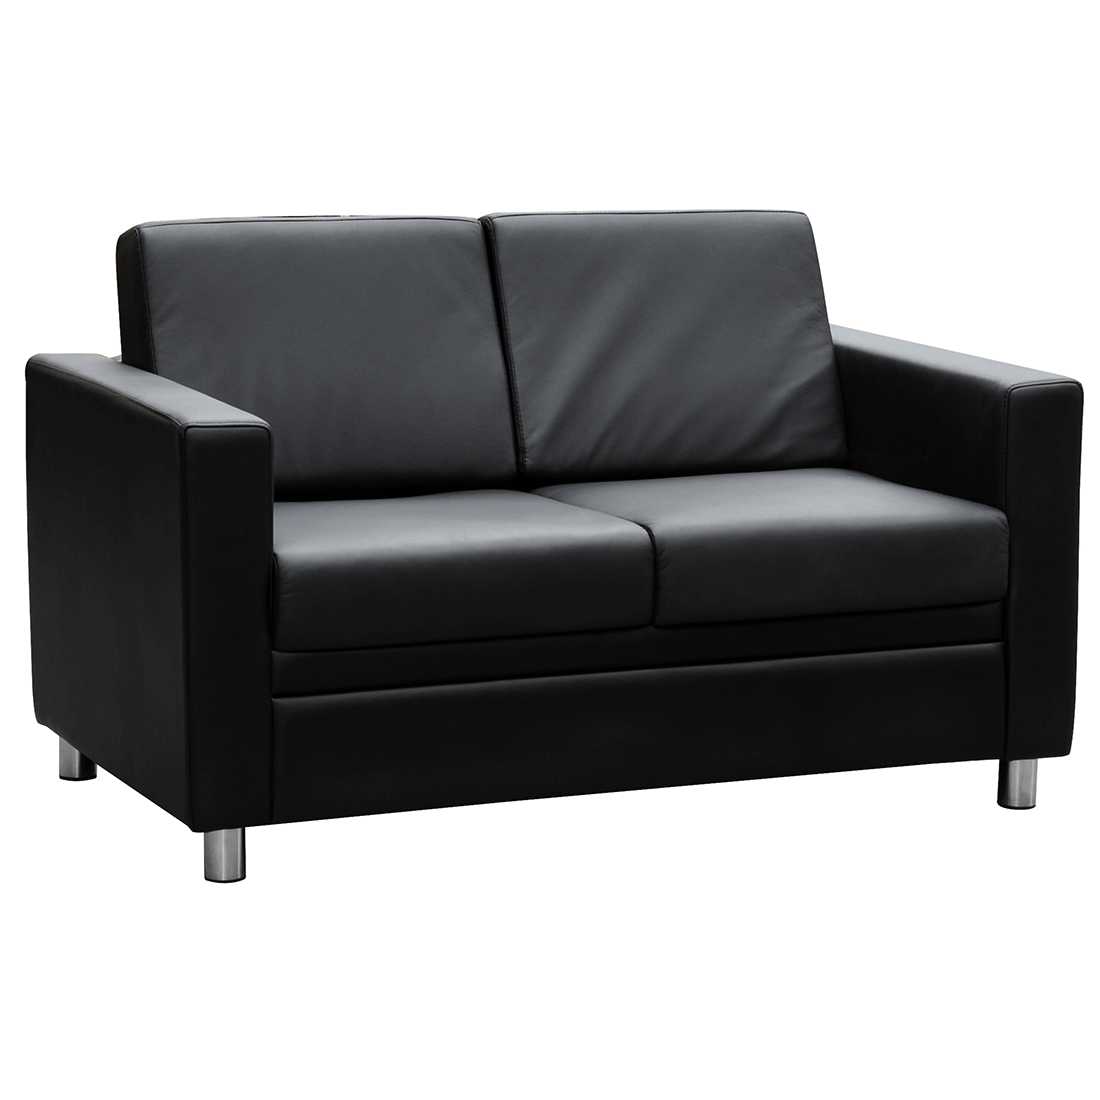 Marcus Leather Lounge 2 Seater - switchoffice.com.au